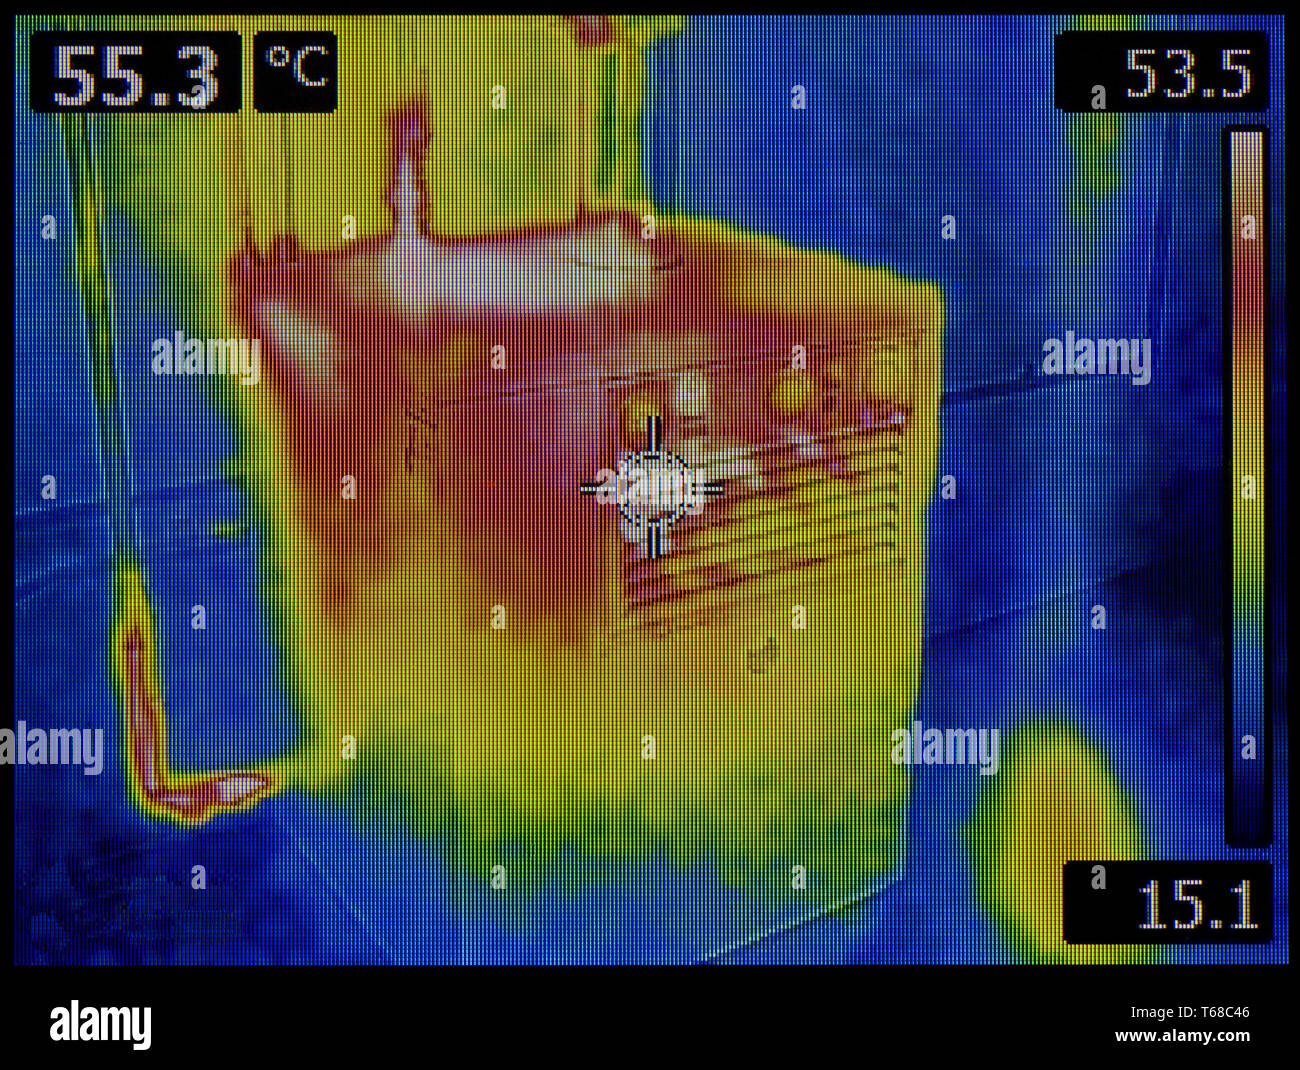 Heat Dissipation Thermal Image Stock Photo